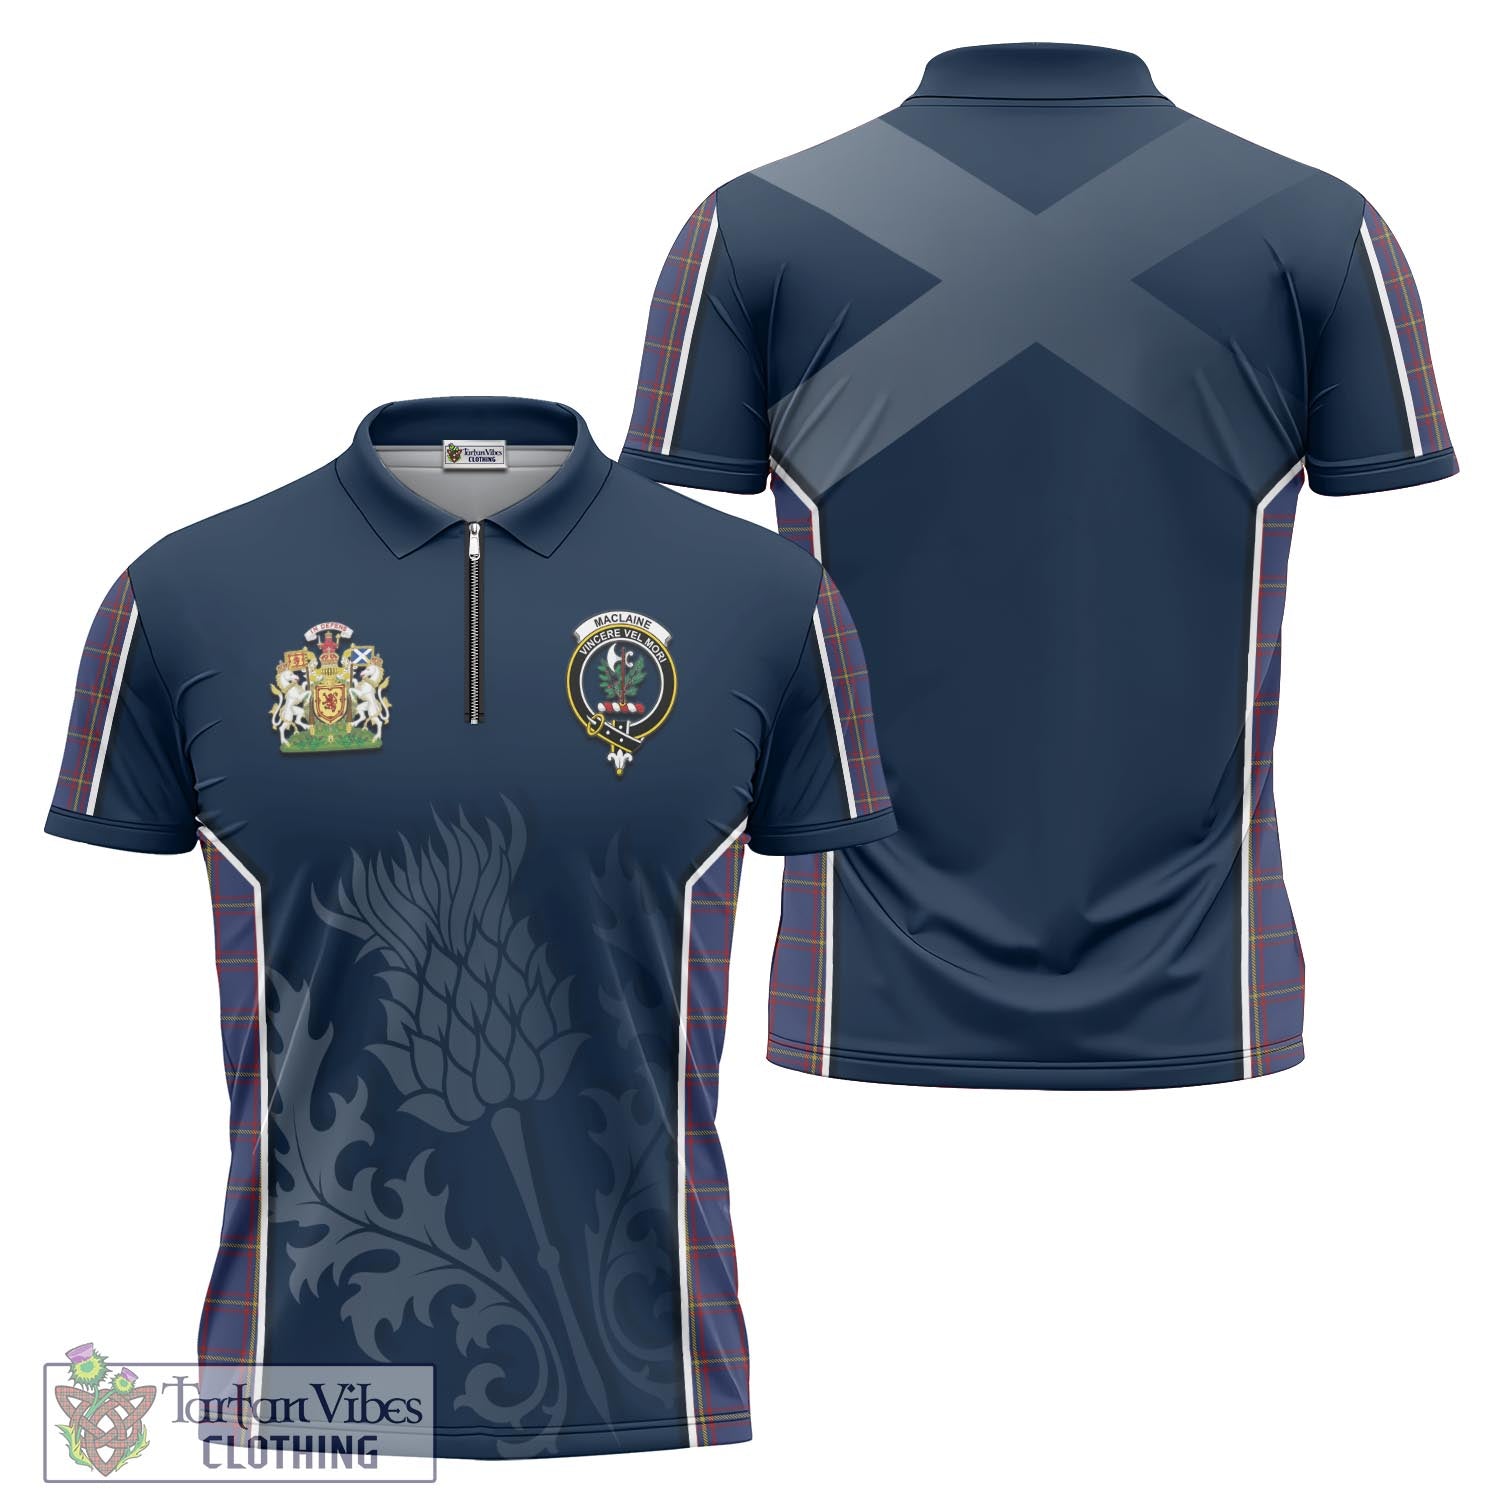 Tartan Vibes Clothing MacLaine of Lochbuie Tartan Zipper Polo Shirt with Family Crest and Scottish Thistle Vibes Sport Style